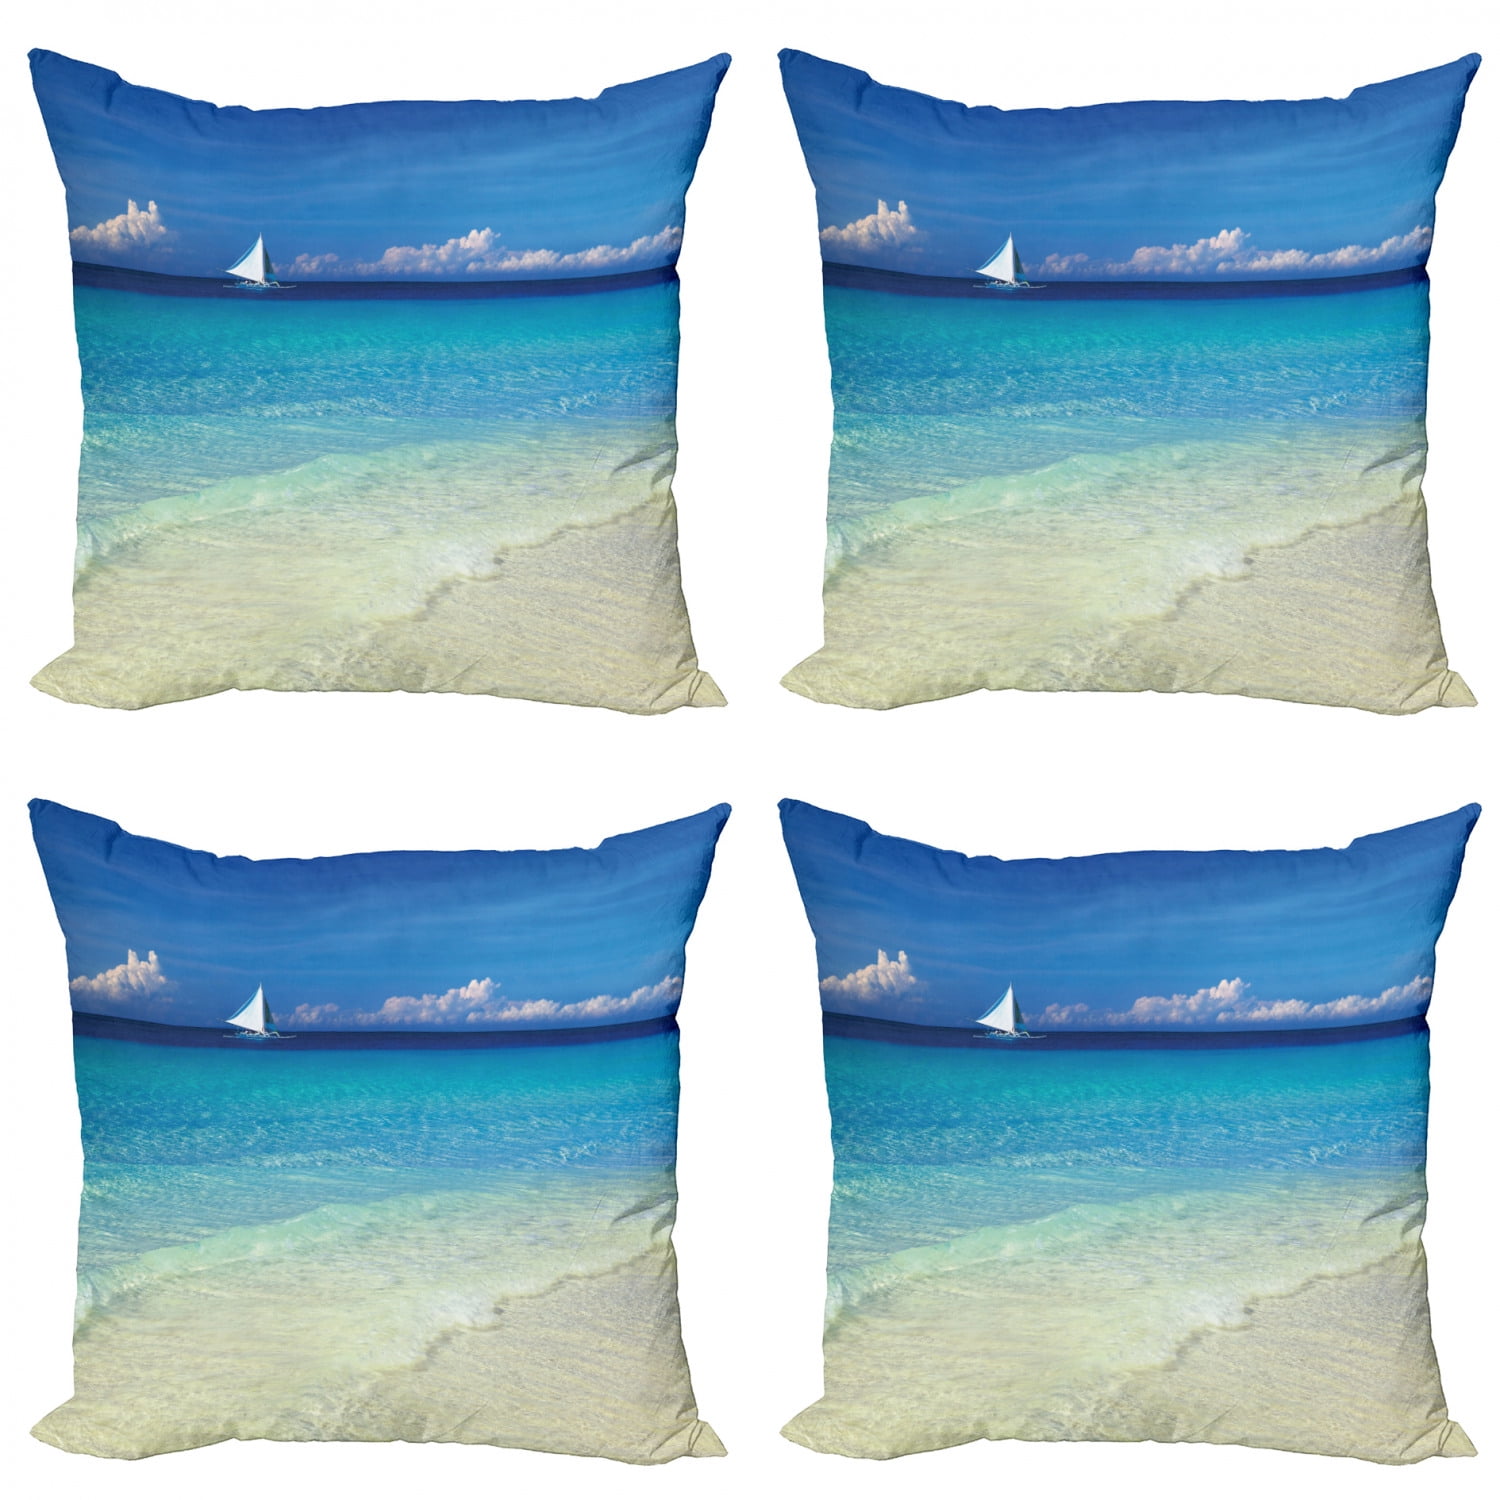 Throw Pillow Case Decor Cushion Covers Square with Hidden Zipper Closure Twin-sided Print Sandy Tropical Paradise Beach with Palm Trees and the Sea Ocean Cushion Case 16x16 inches 